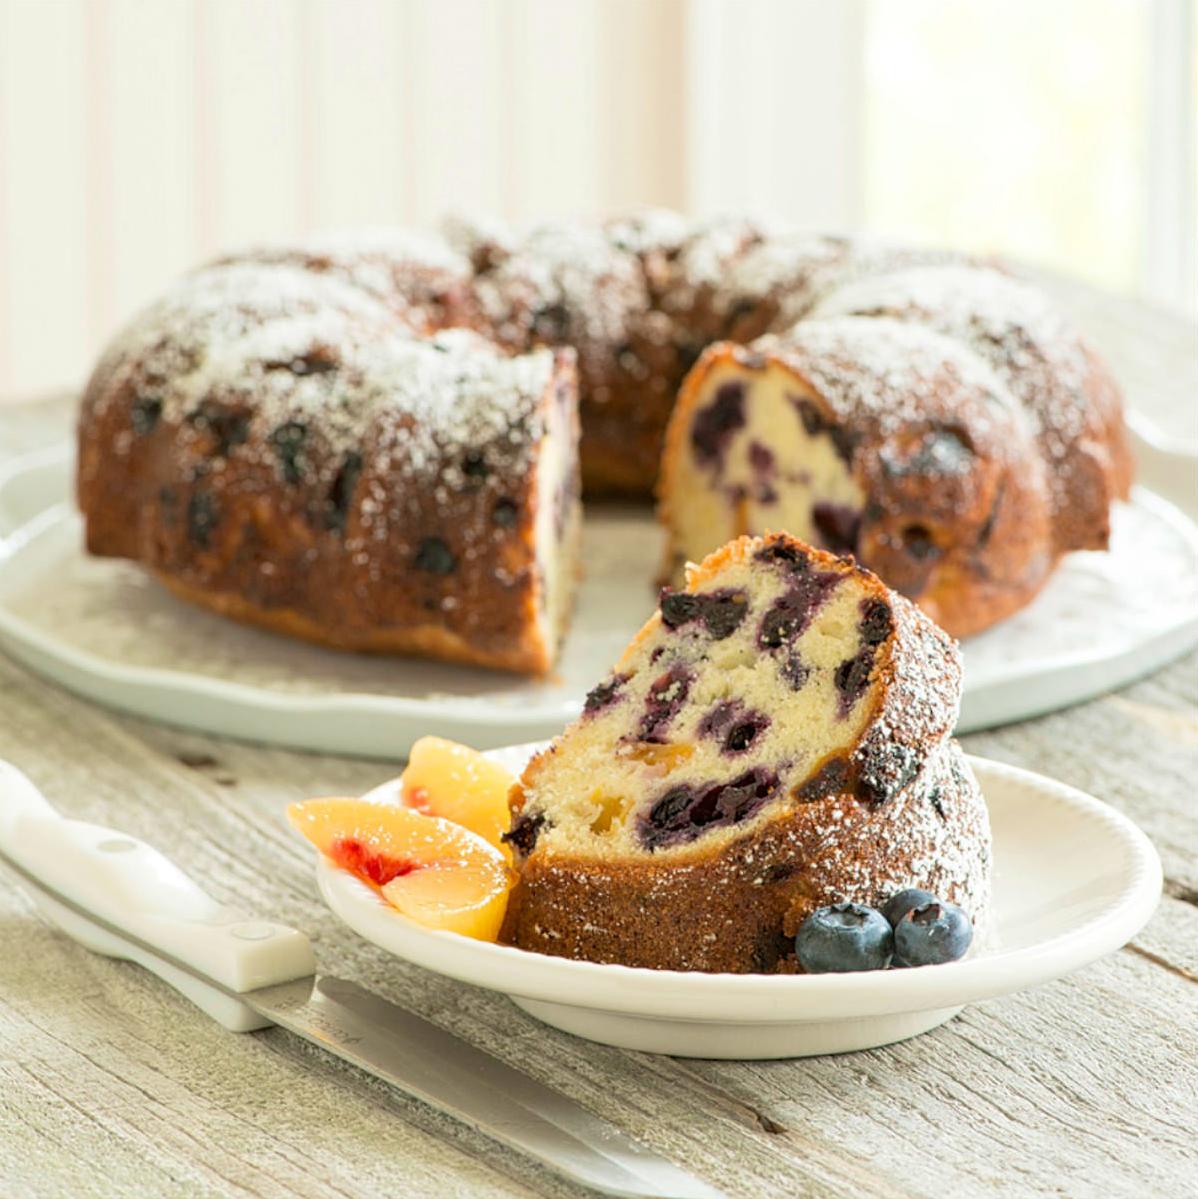  Sink your teeth into the tender, buttery cake that is paired perfectly with the sweet and tart fruit.